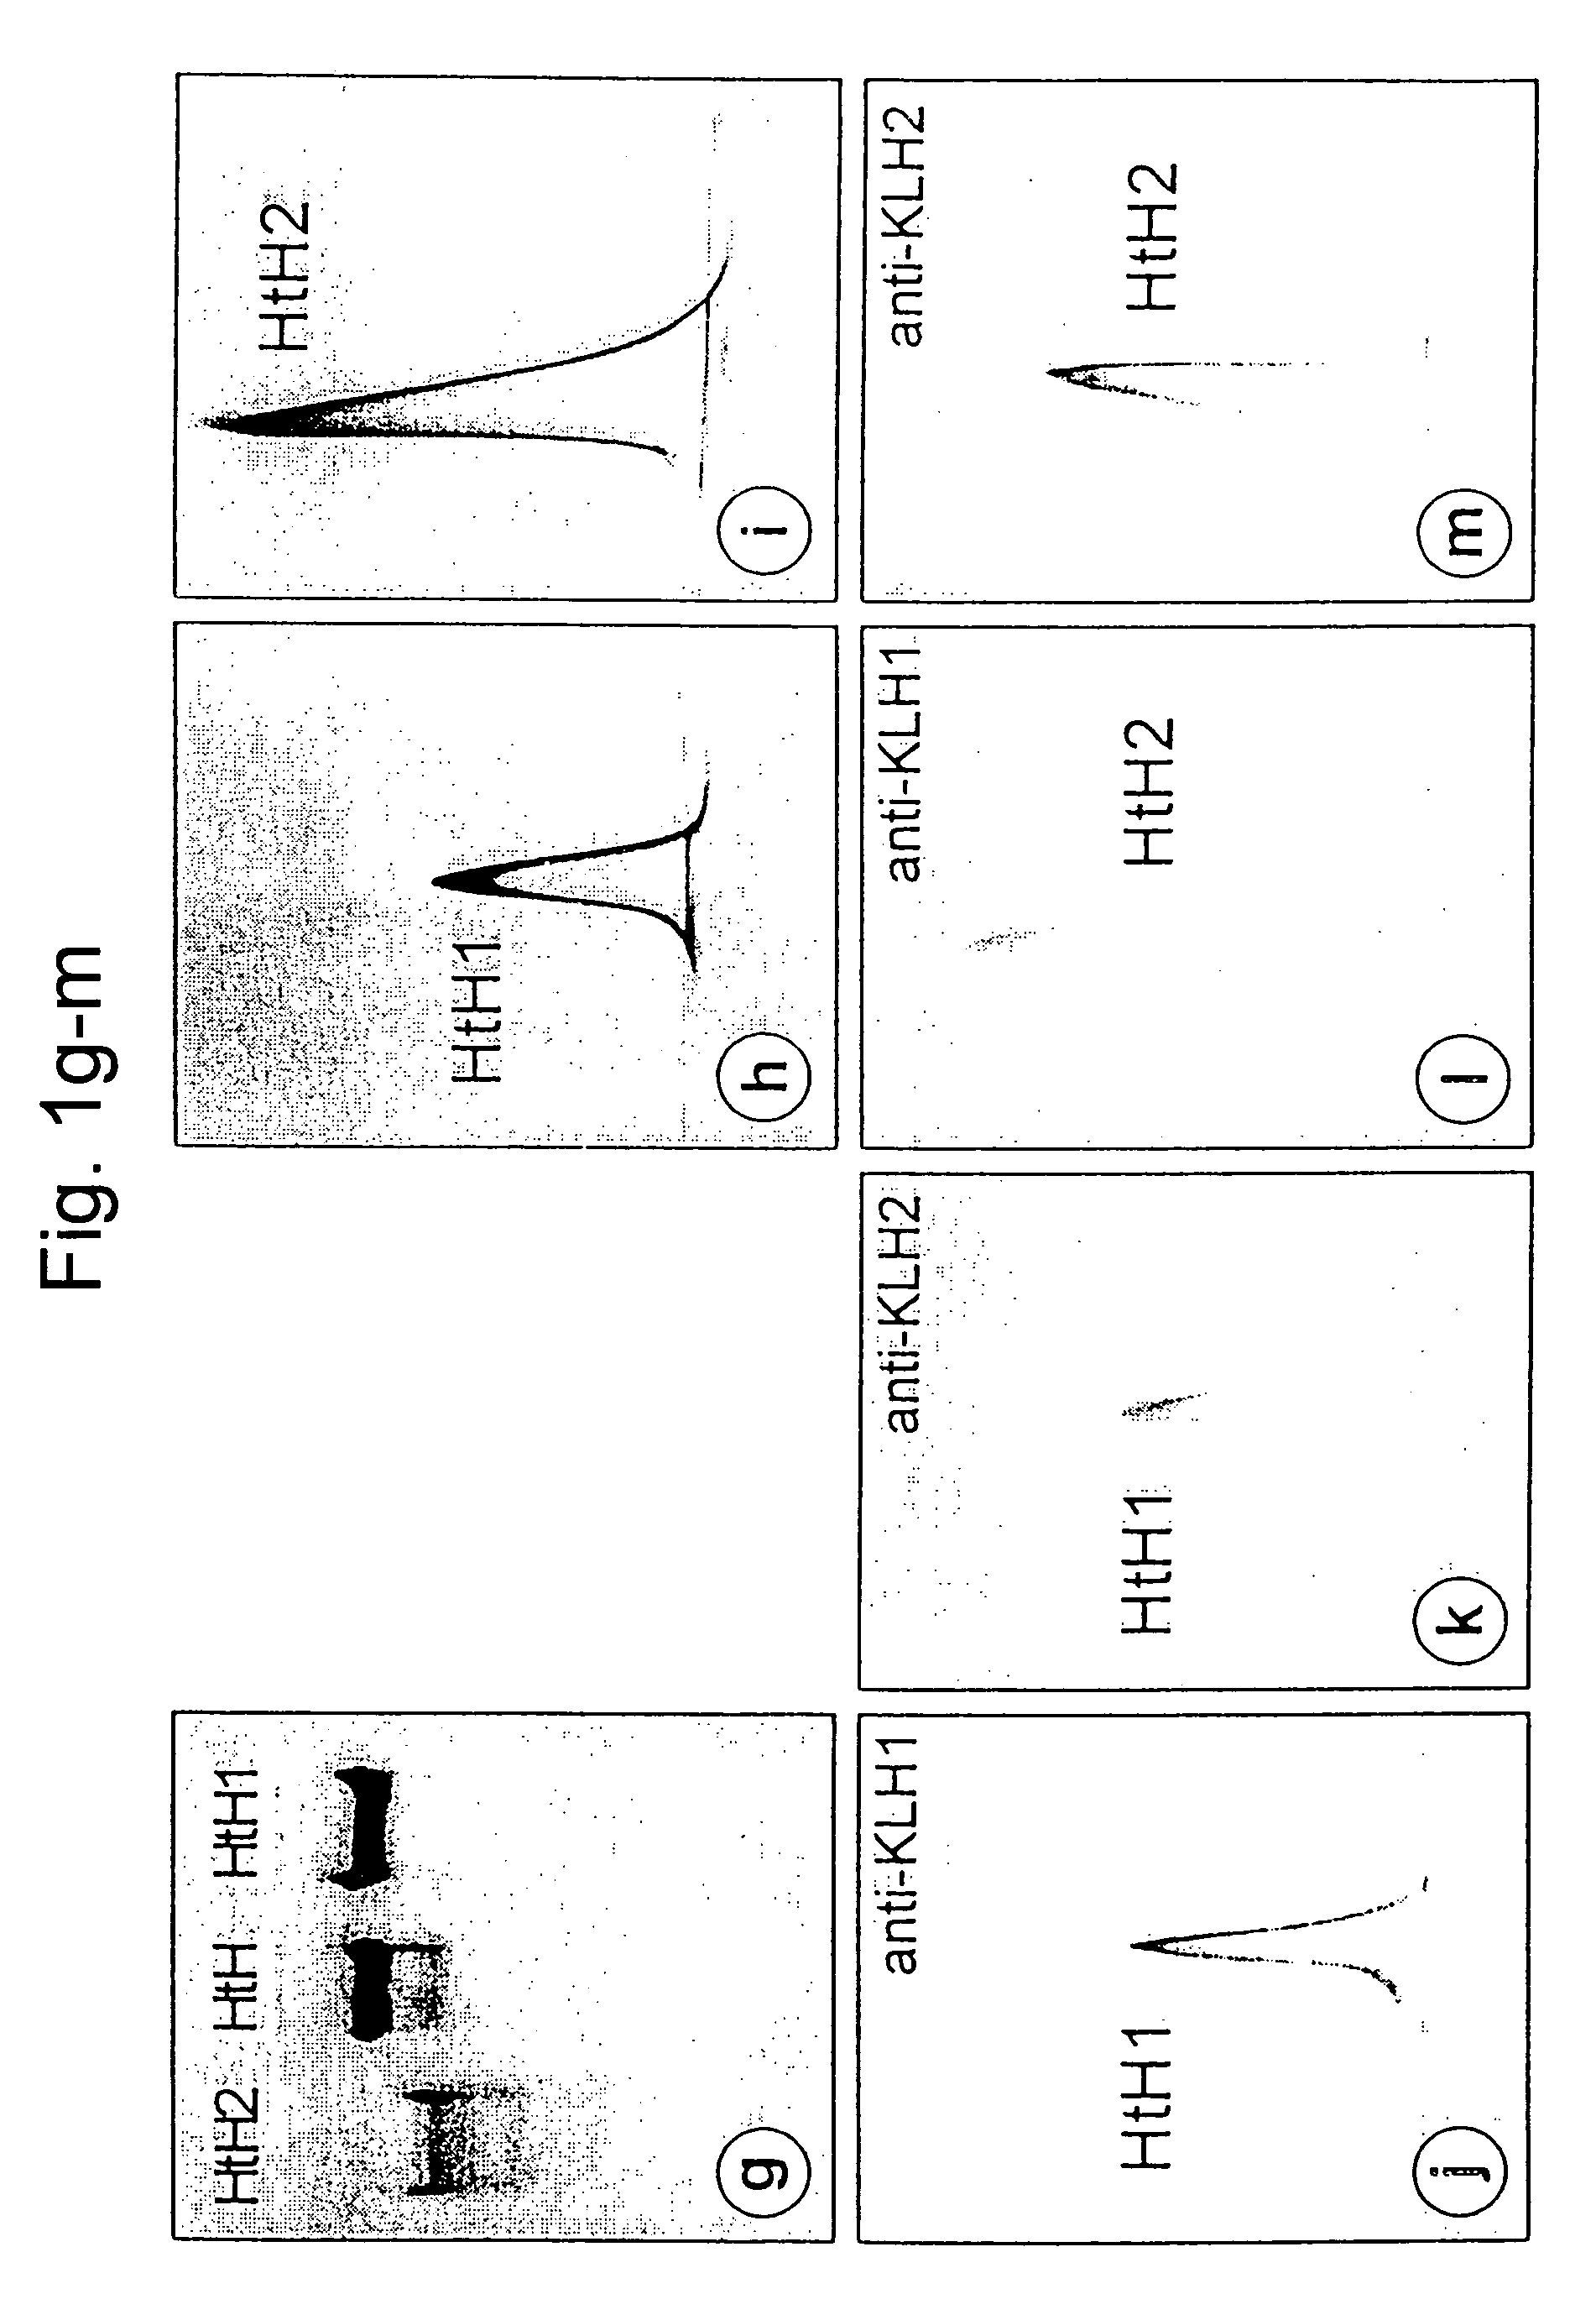 Nucleic acid molecule comprising a nucleic acid sequence coding for a haemocyanin